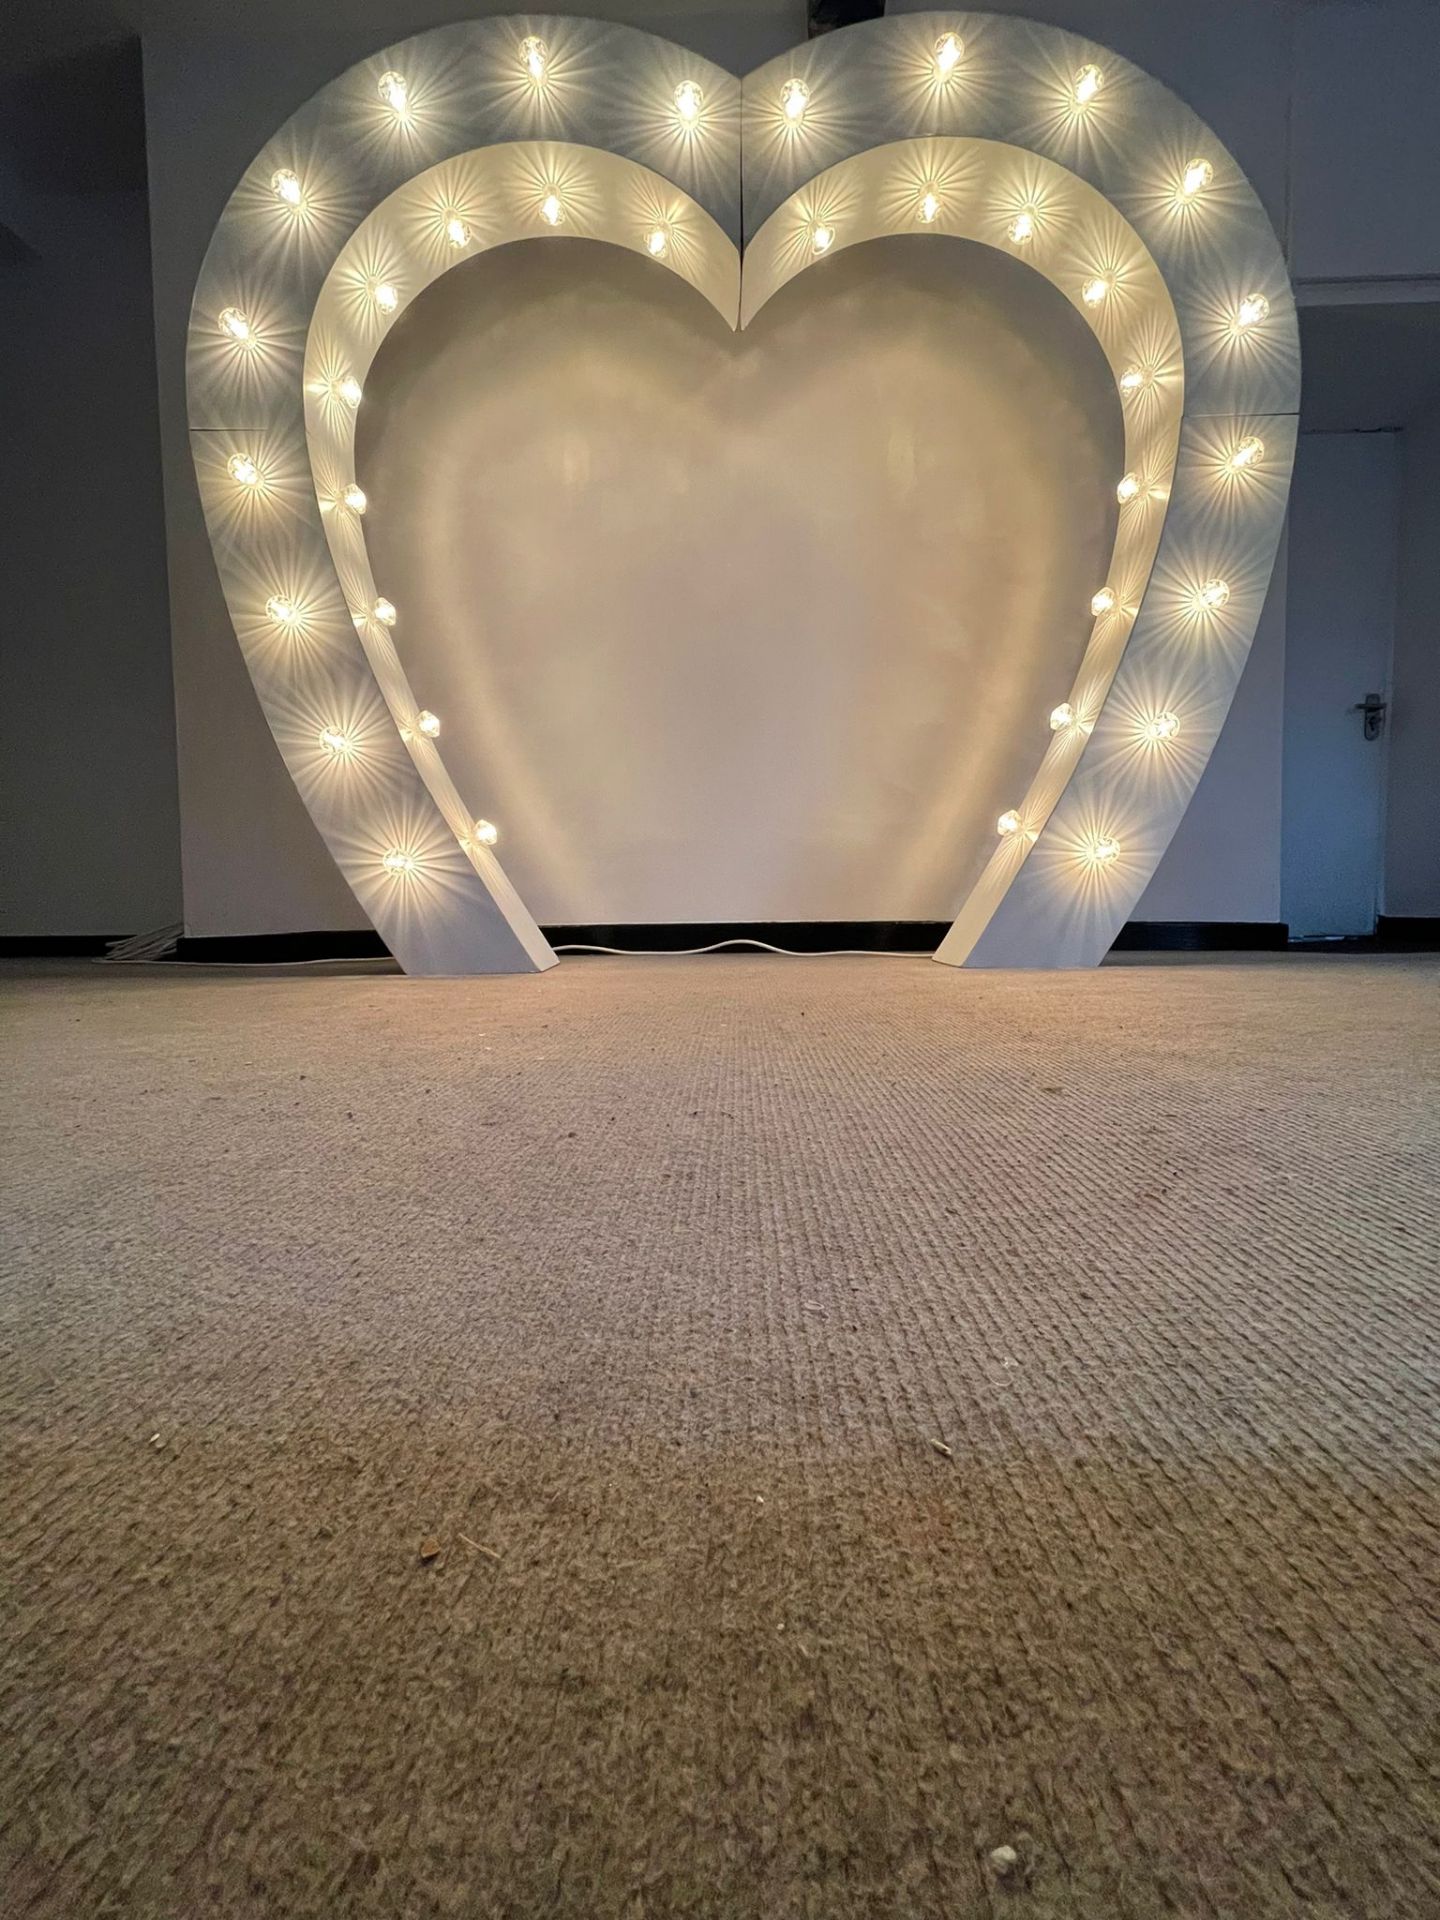 Heart Shaped Light Up LED Marquee Decoration * Missing 1 Bolt* - Image 3 of 13